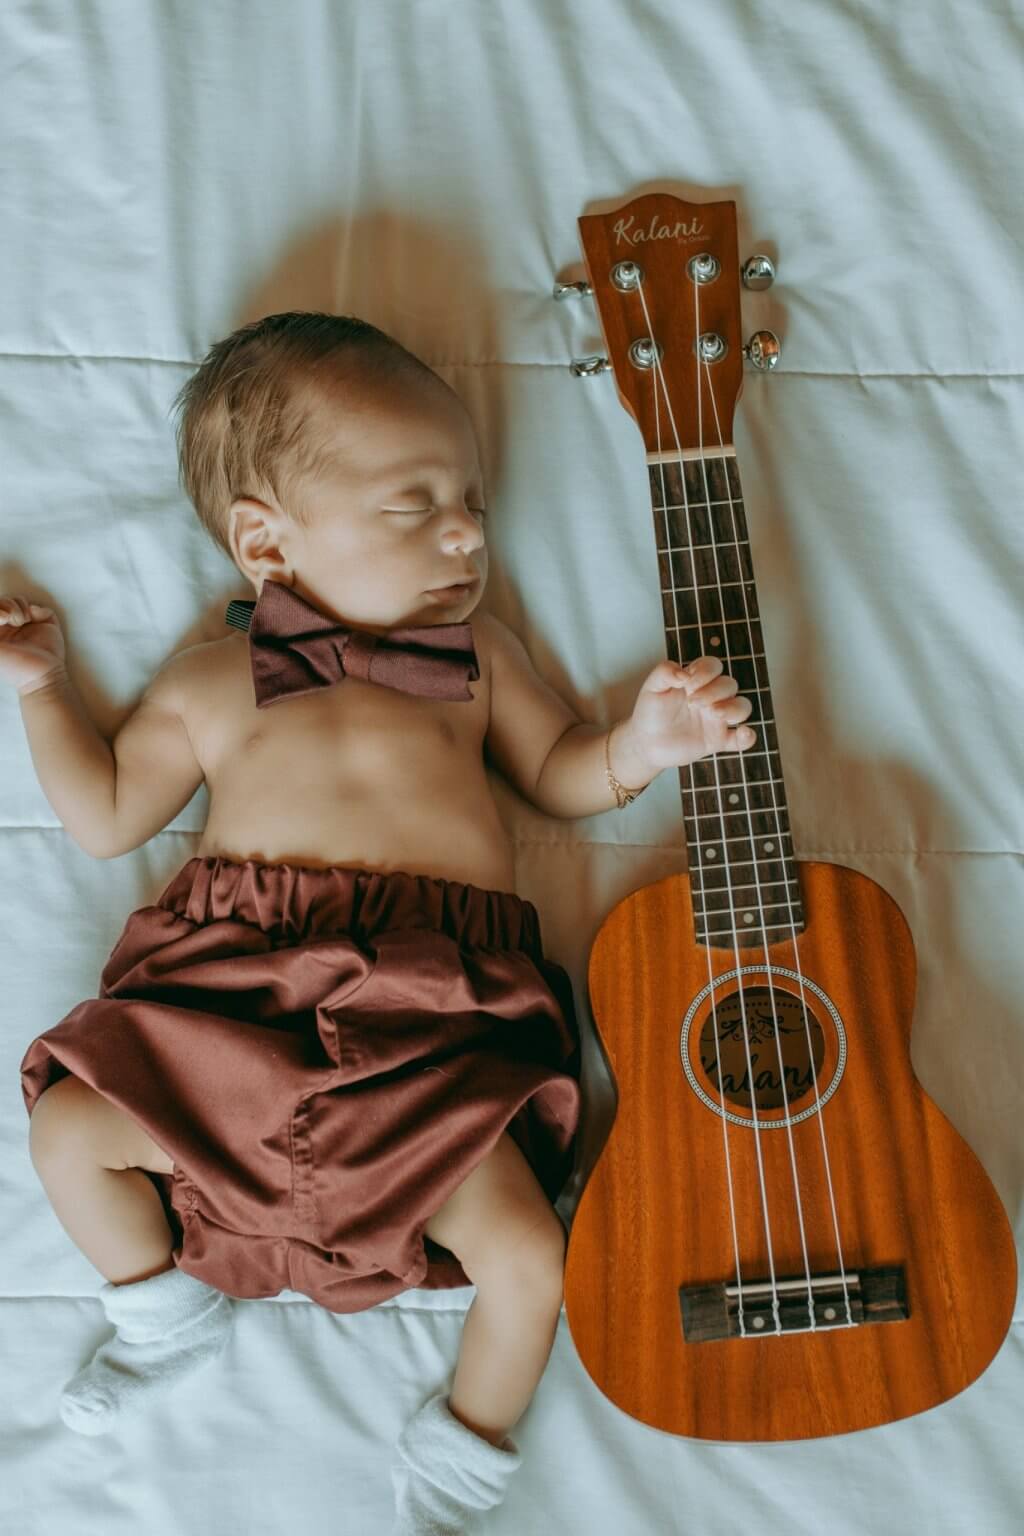 This blog discusses the differences between recorded vs live music therapy by a music therapist for premature babies.